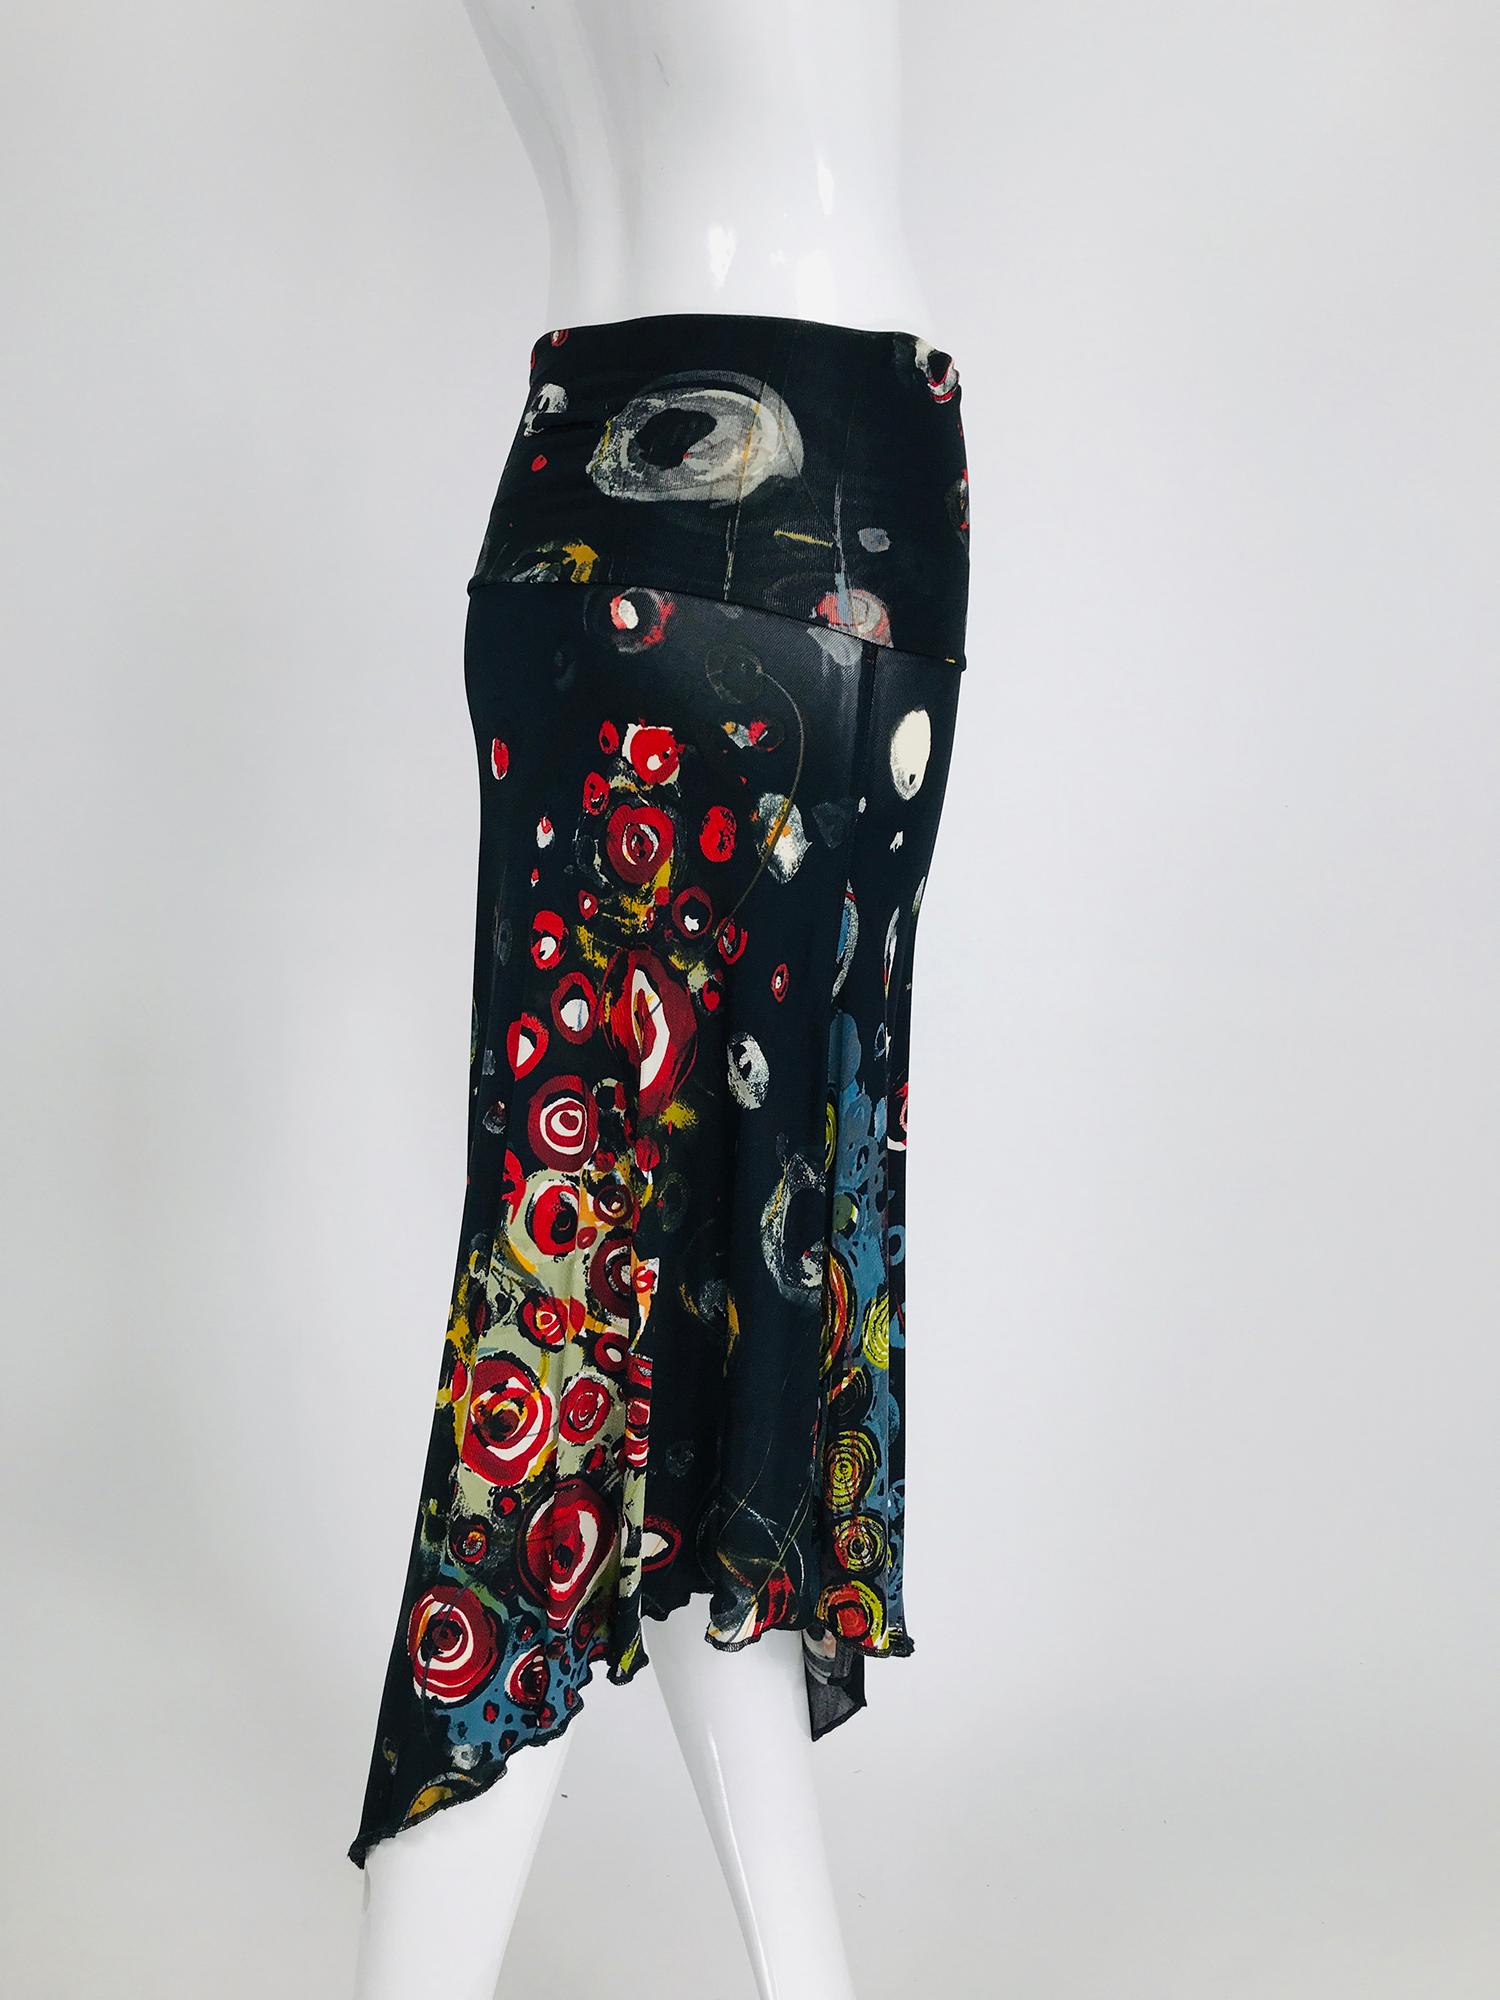 Jean Paul Gaultier Maille Femme Printed Mesh Asymmetrical Skirt In Good Condition In West Palm Beach, FL